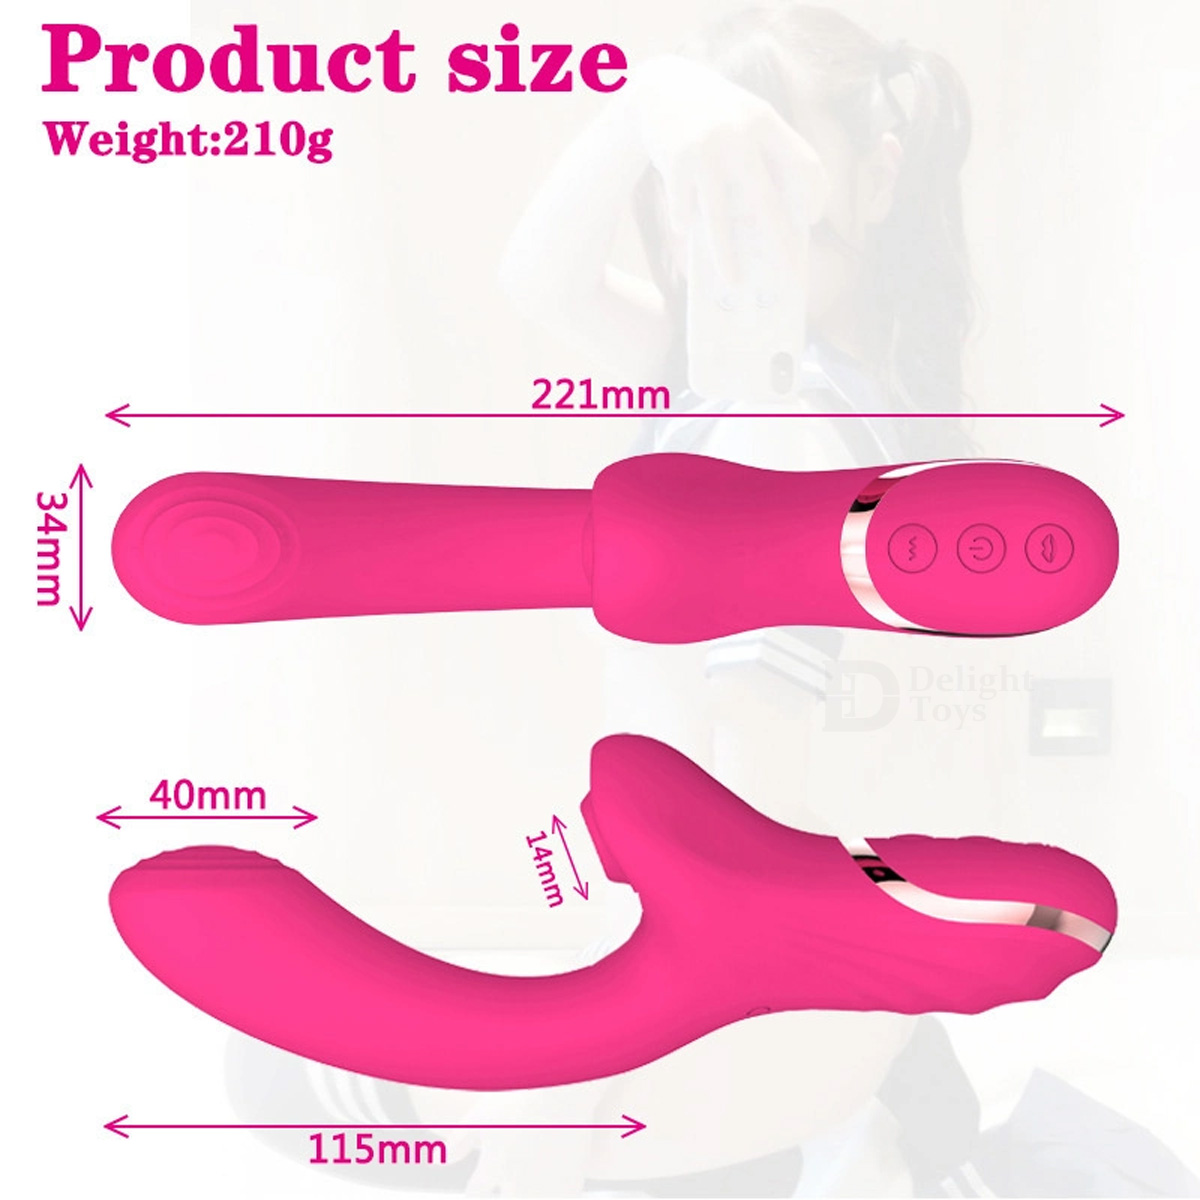 Size of g-spot clitoral sucking rabbit vibrator sex toy for female